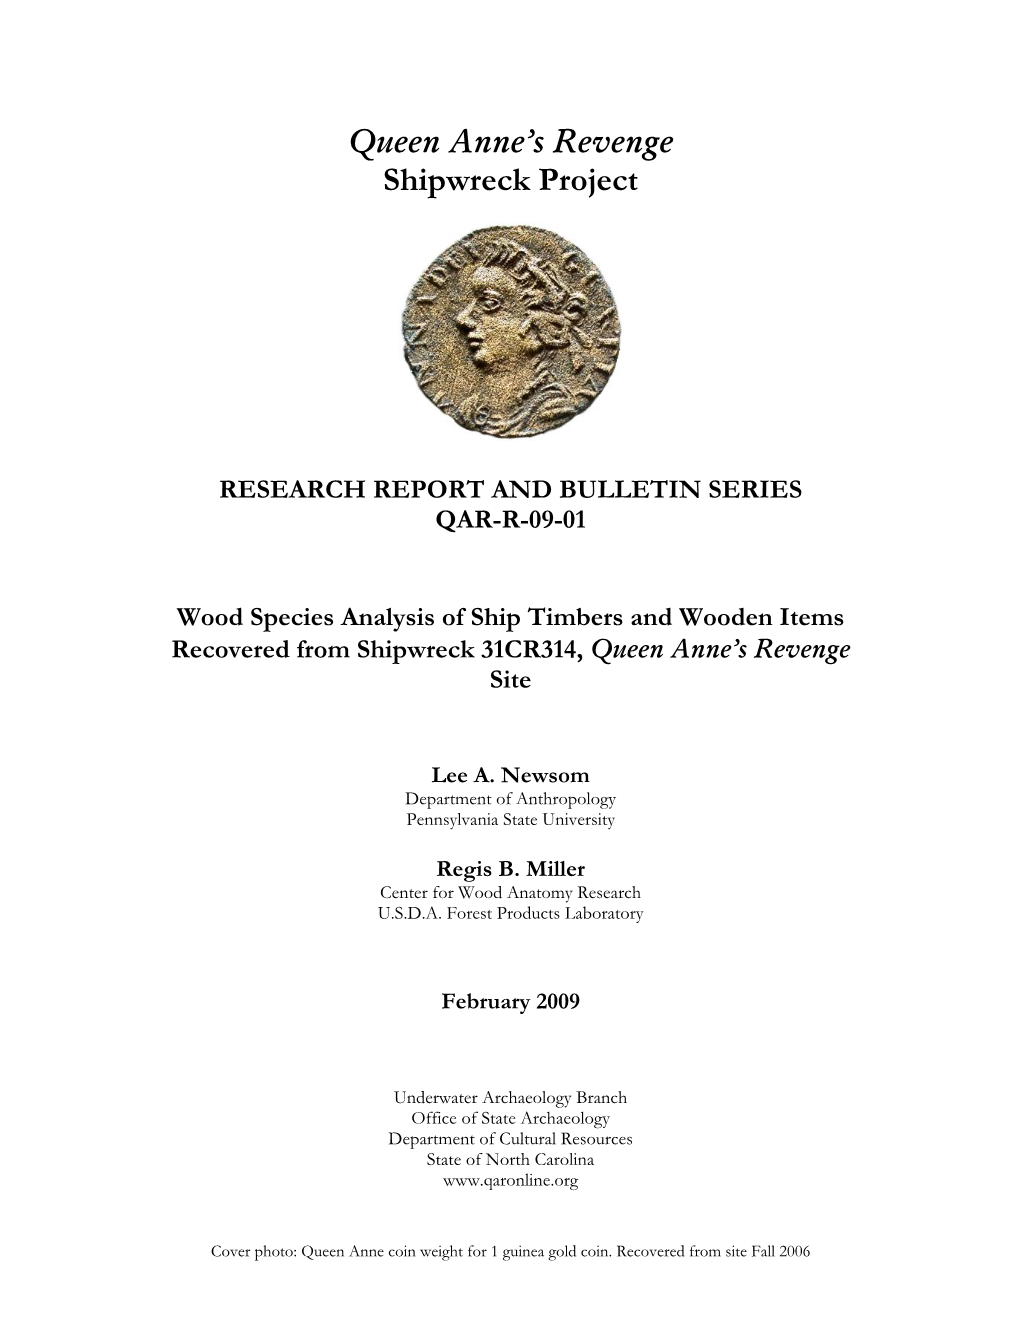 Wood Species Analysis of Ship Timbers and Wooden Items Recovered from Shipwreck 31CR314, Queen Anne’S Revenge Site